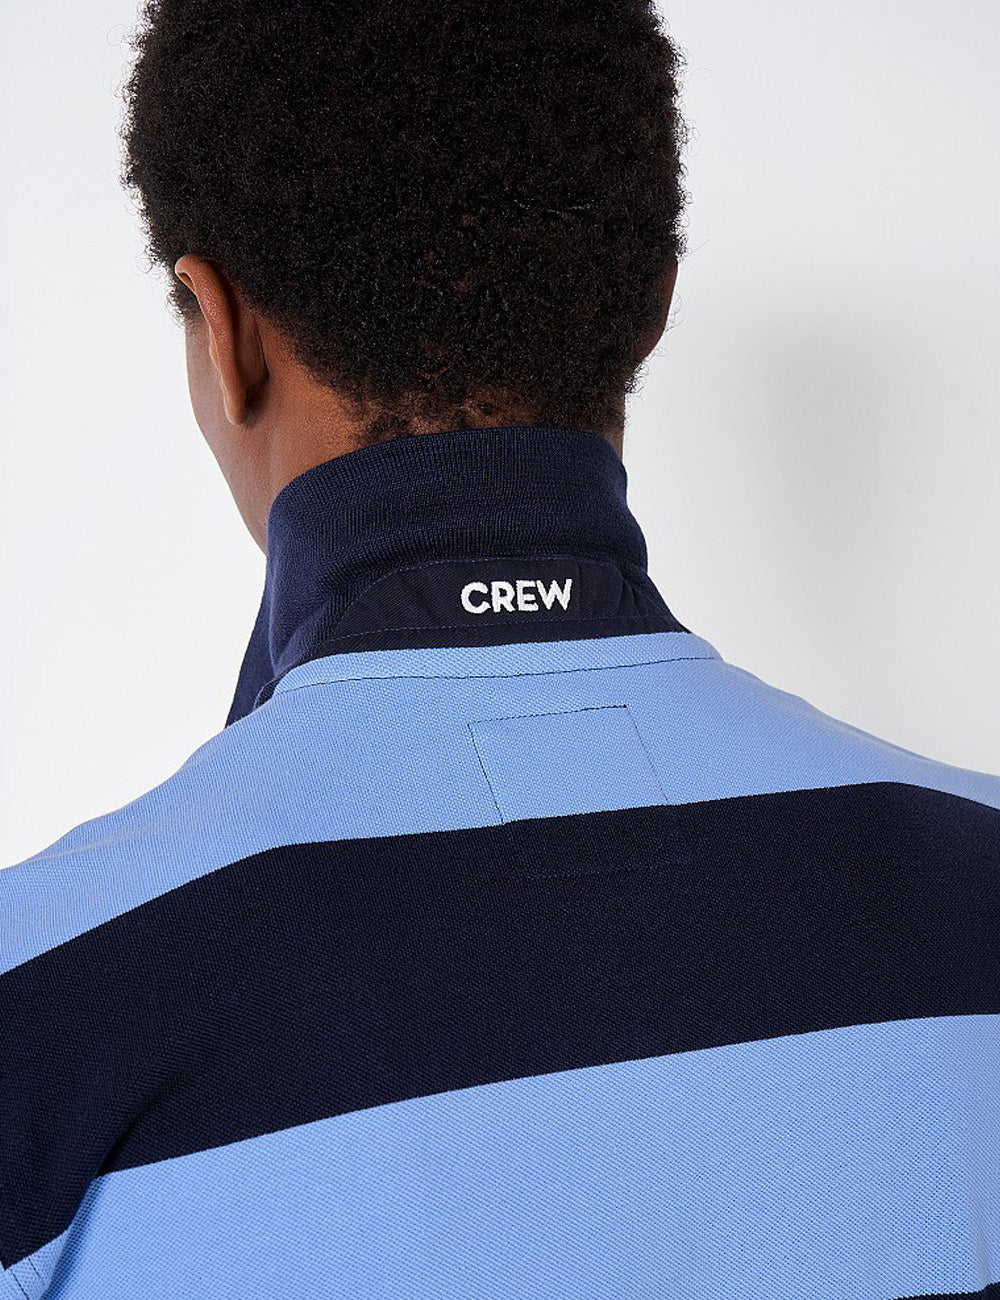 Close up of the Crew branding on the back of the collar